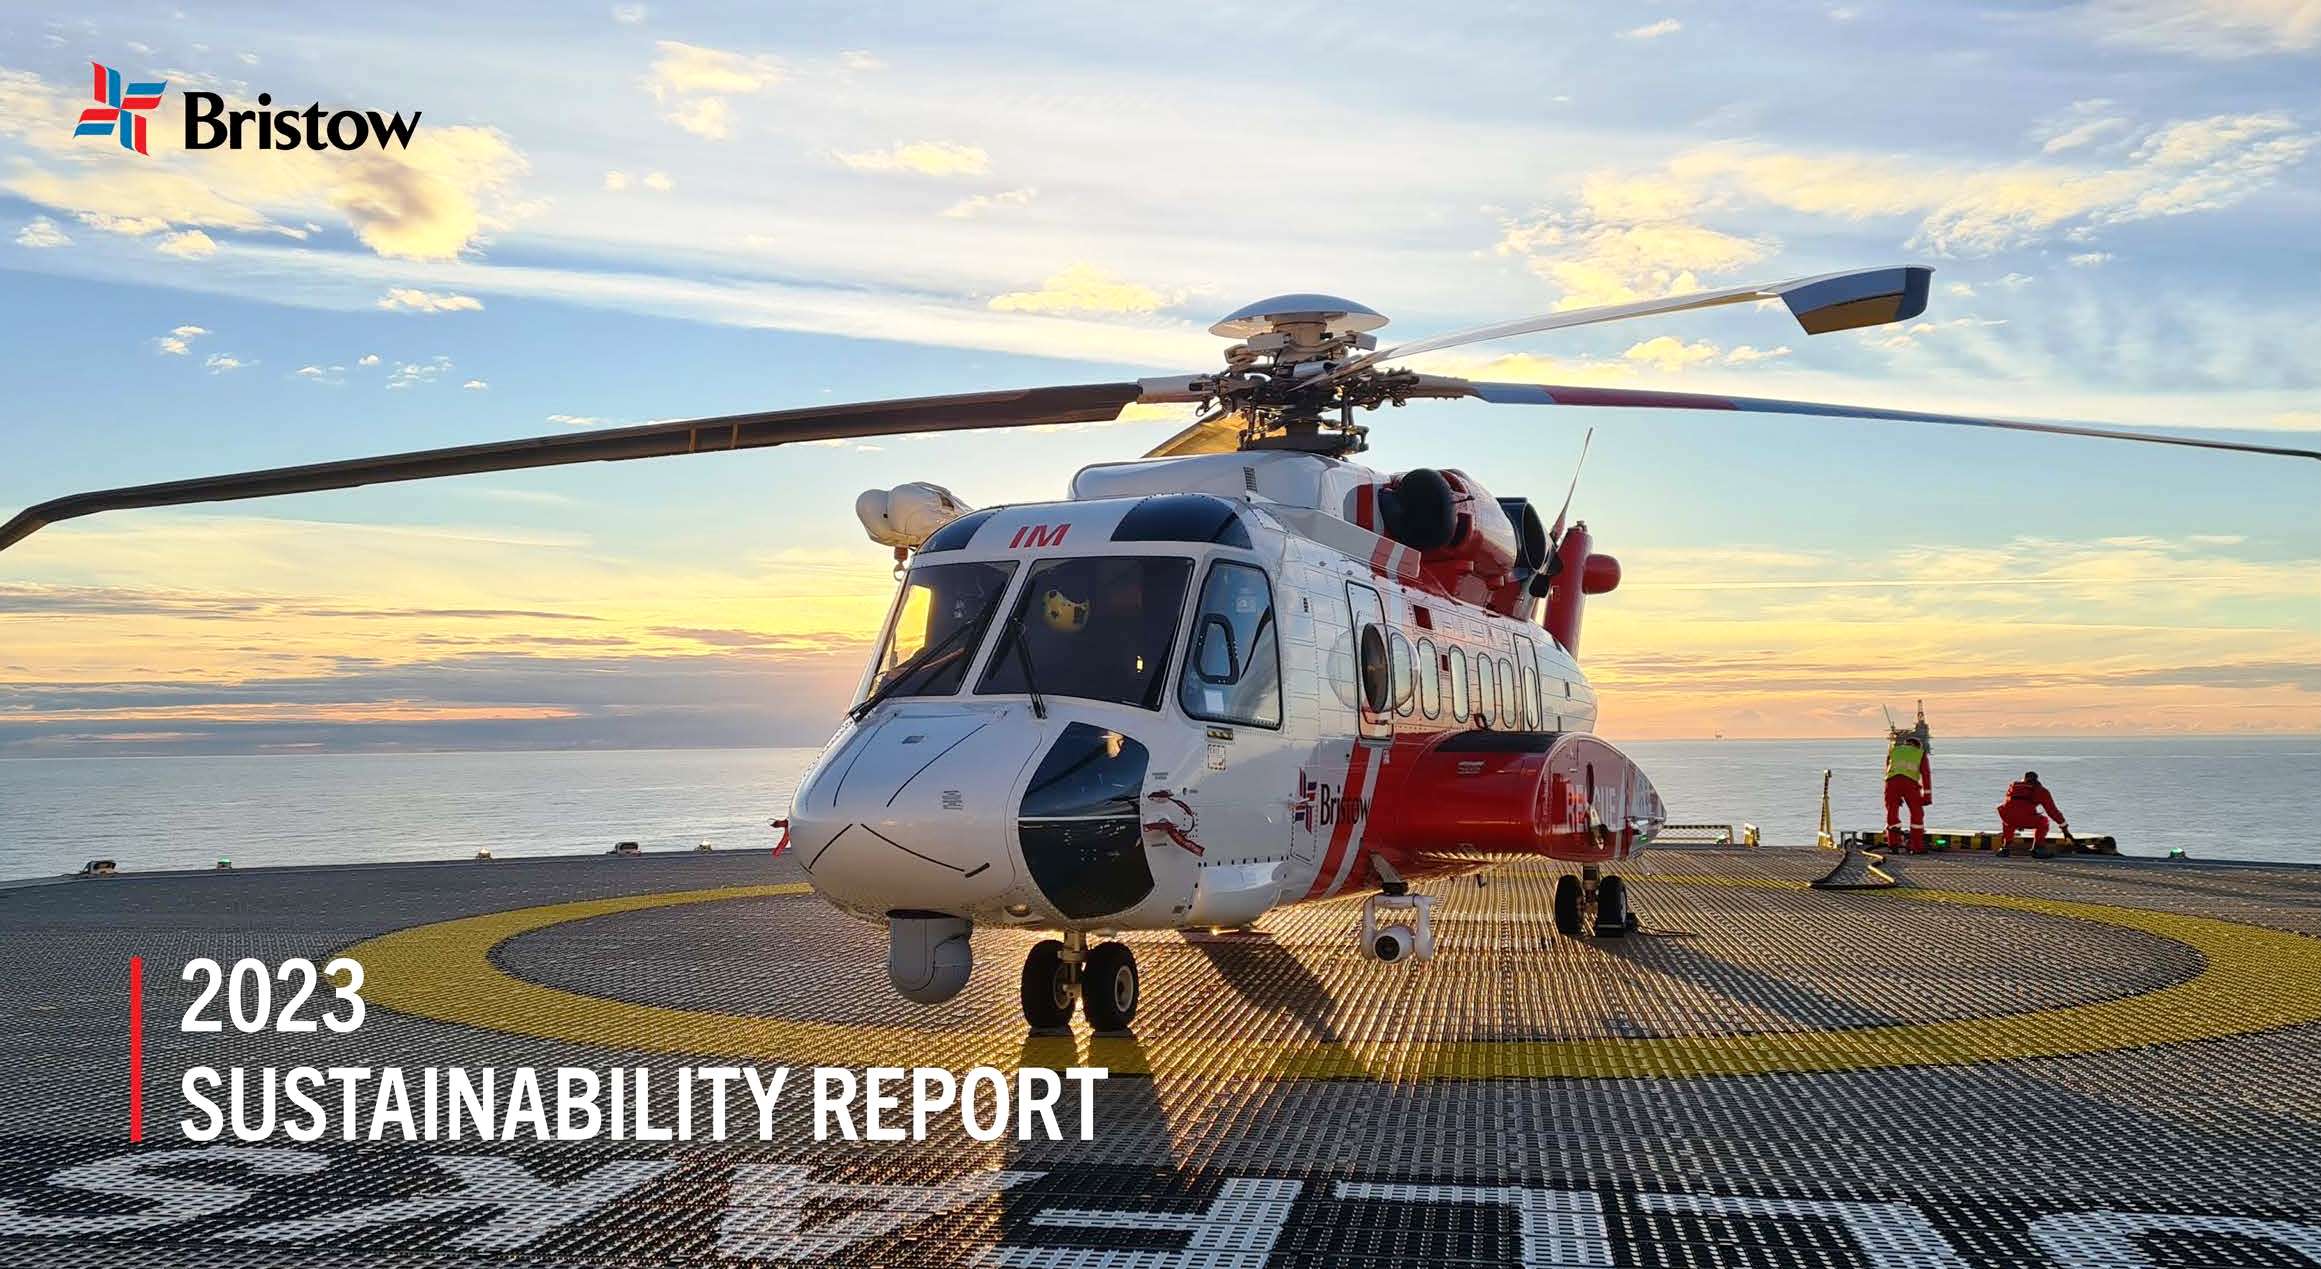 Bristow releases 2023 Sustainability Report